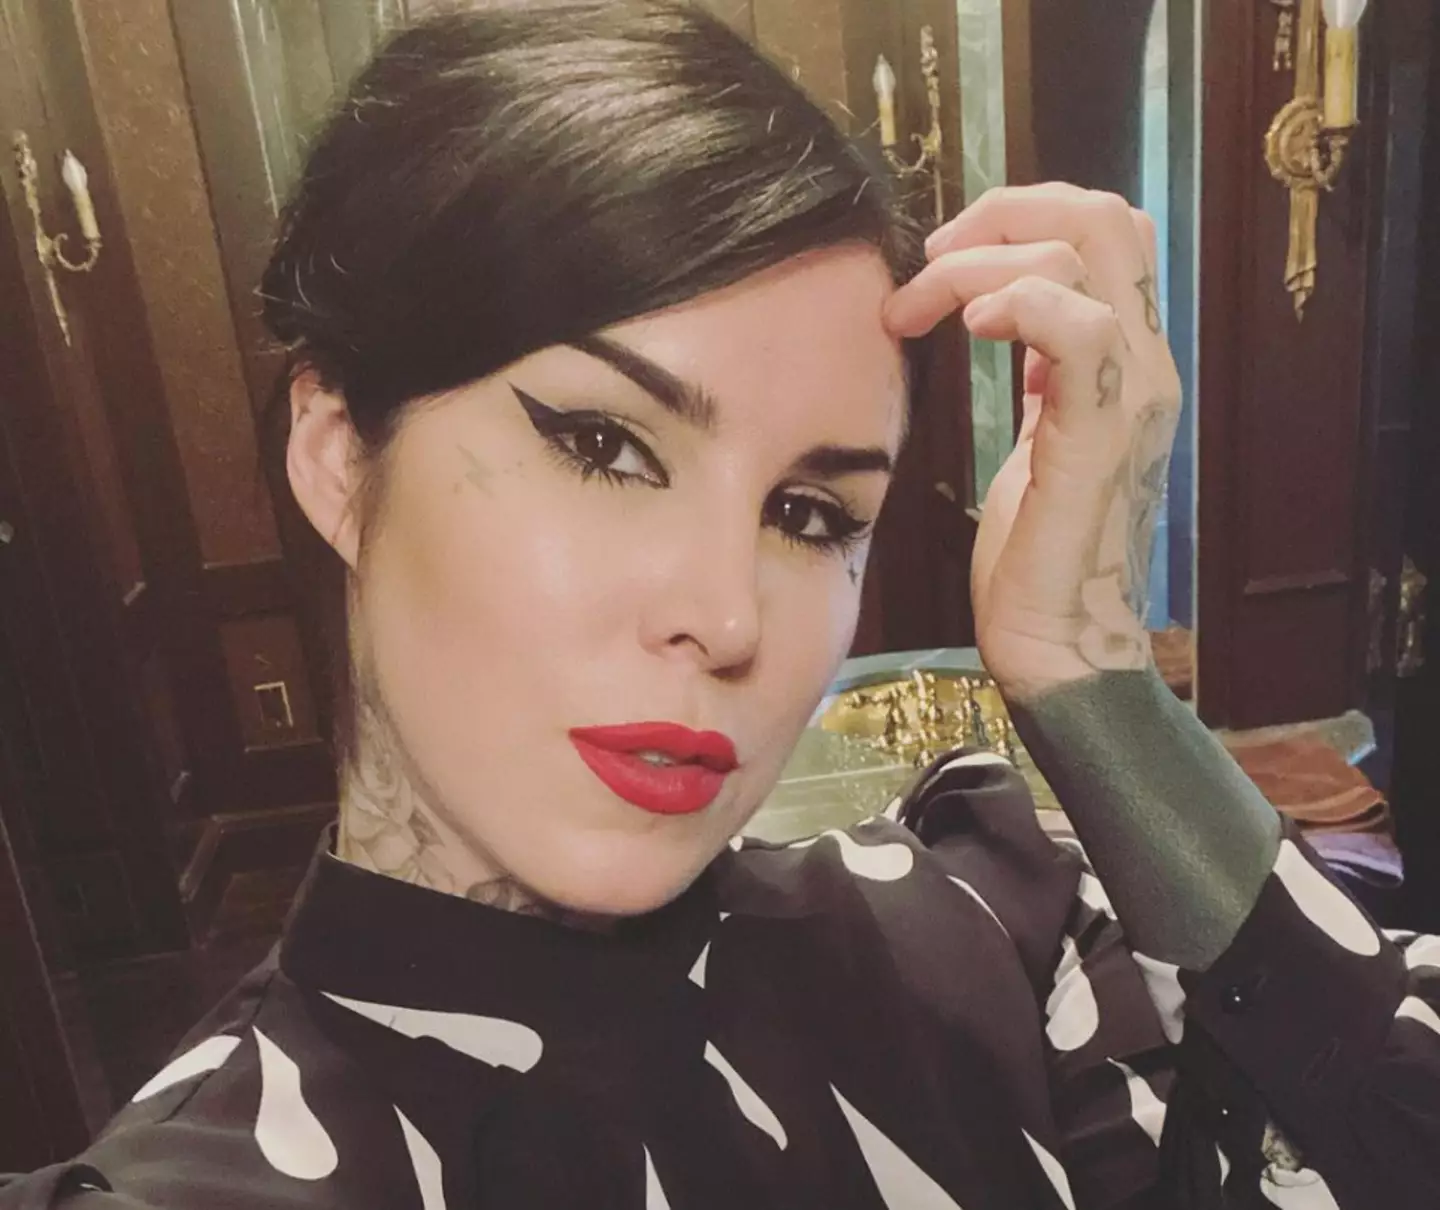 Kat Von D argued that people should not judge a book by its cover.